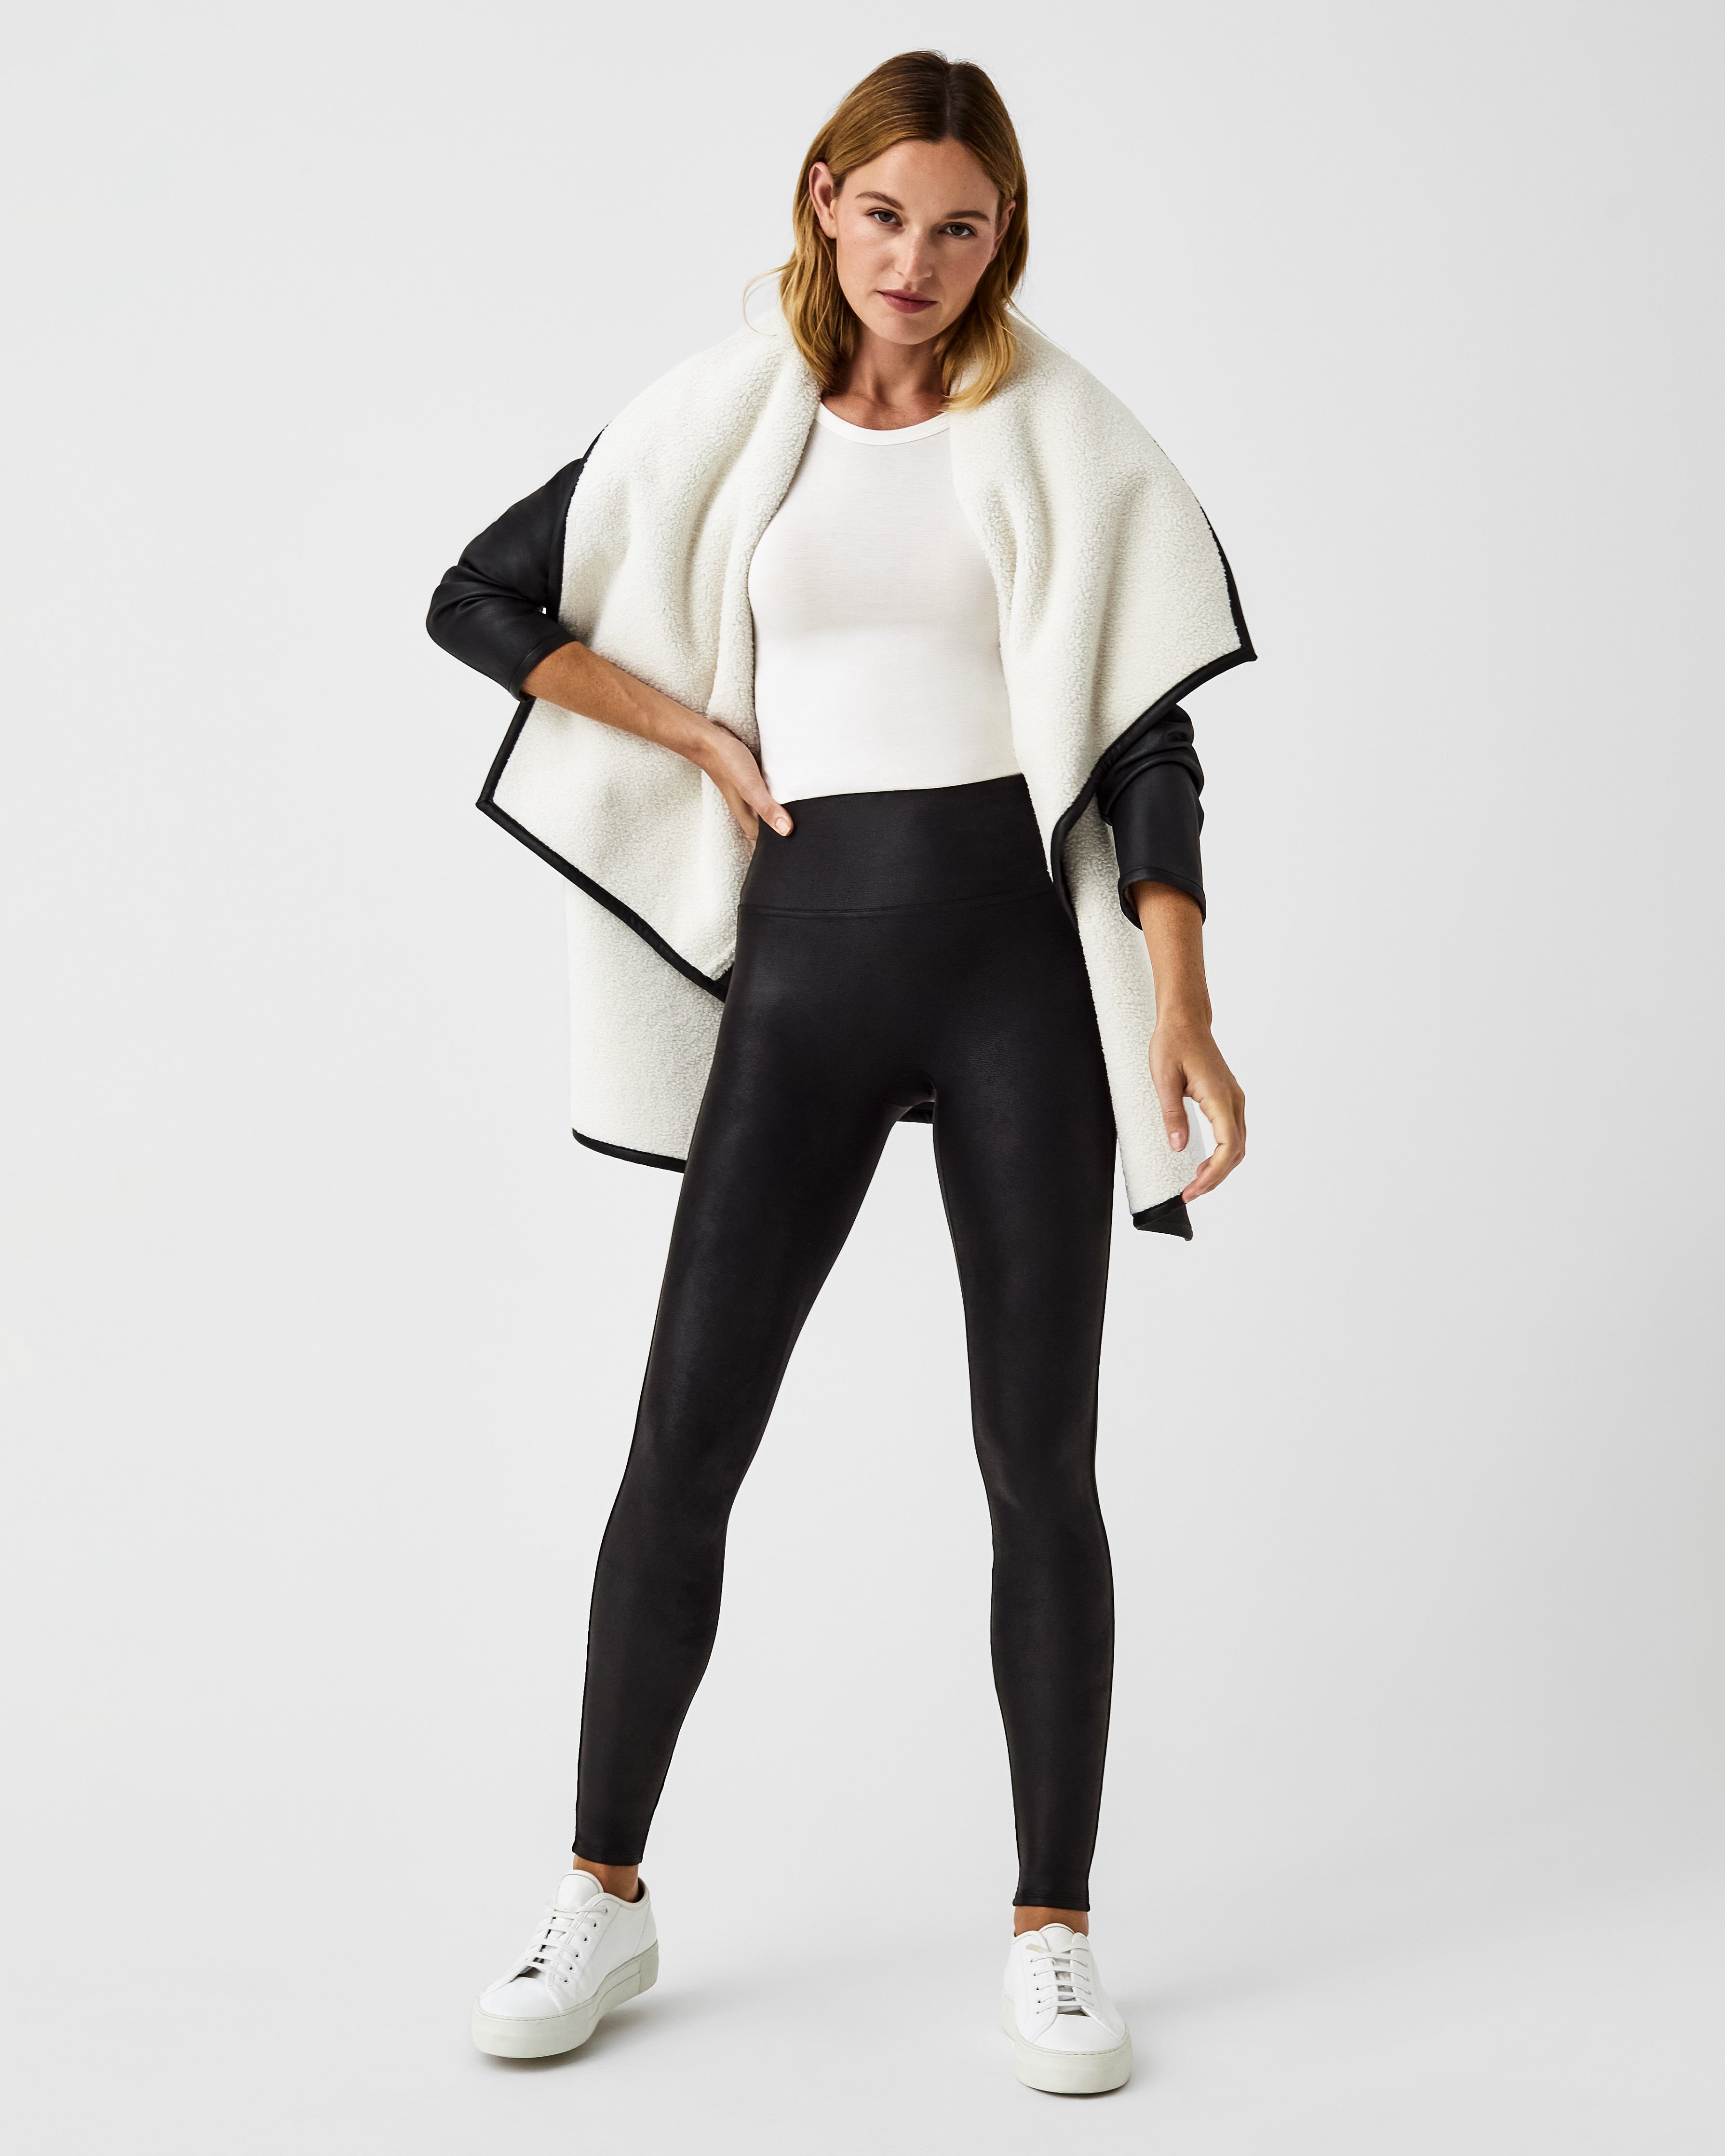 Spanx did it! Added fleece to their faux leather leggings